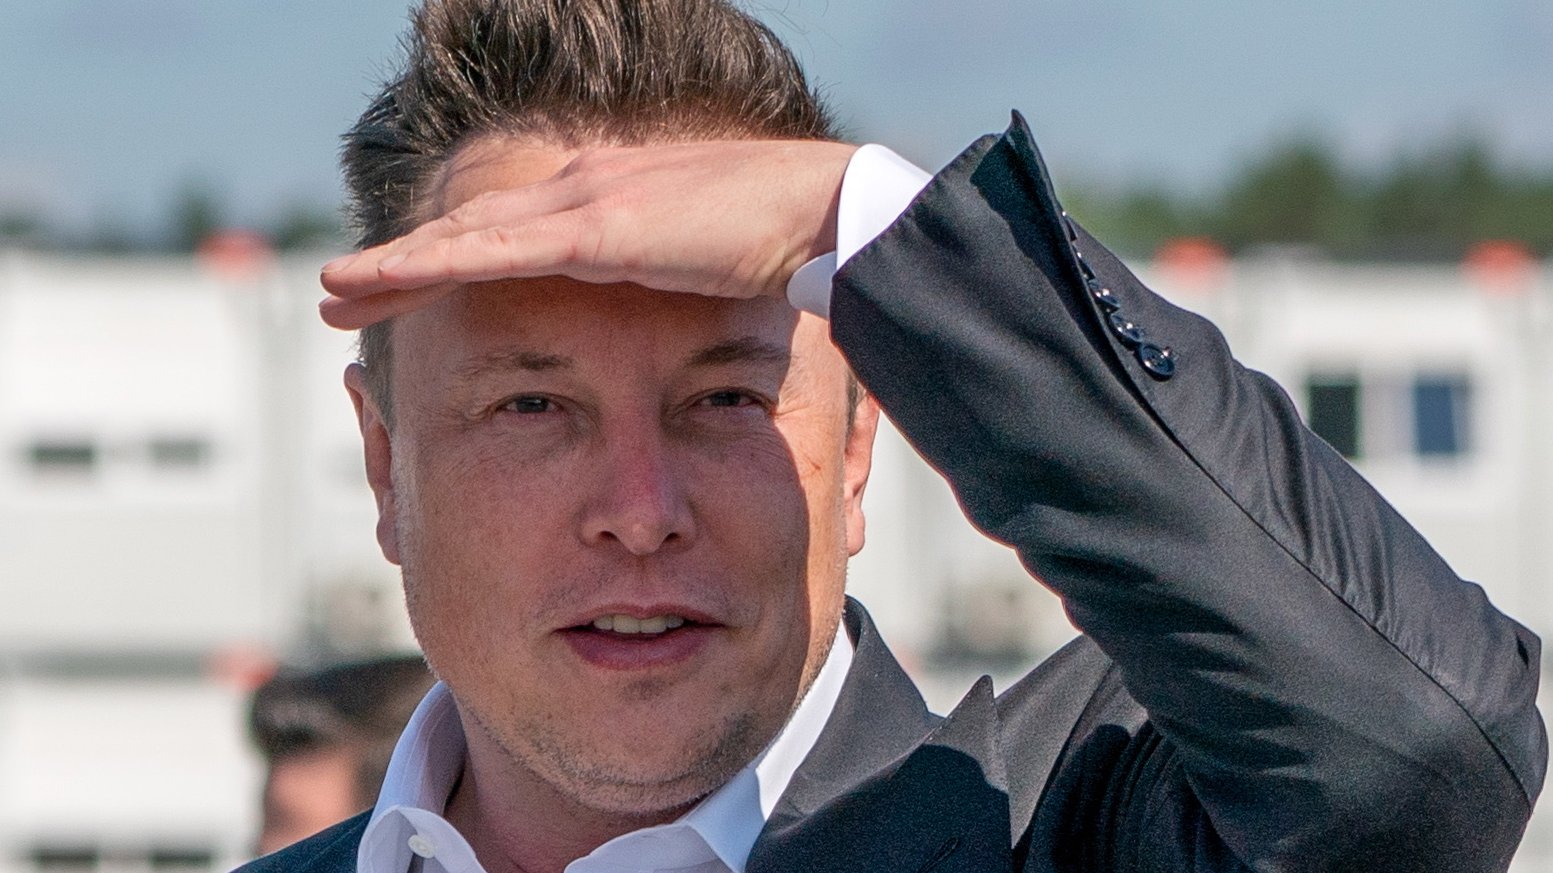 epa09889605 (FILE) - Tesla and SpaceX CEO Elon Musk arrives for a statement at the construction site of the Tesla Giga Factory in Gruenheide near Berlin, Germany, 03 September 2020 (reissued 14 April 2022). A statement published by the US Securities and Exchange Commission (SEC) on 14 April 2022 reads that Elon Musk has filed a proposal to acquire all available Twitter shares at a price of 54.20 US dollars per share, an offer that would total in 43.4 billion USD of company value.  EPA/ALEXANDER BECHER *** Local Caption *** 56315886